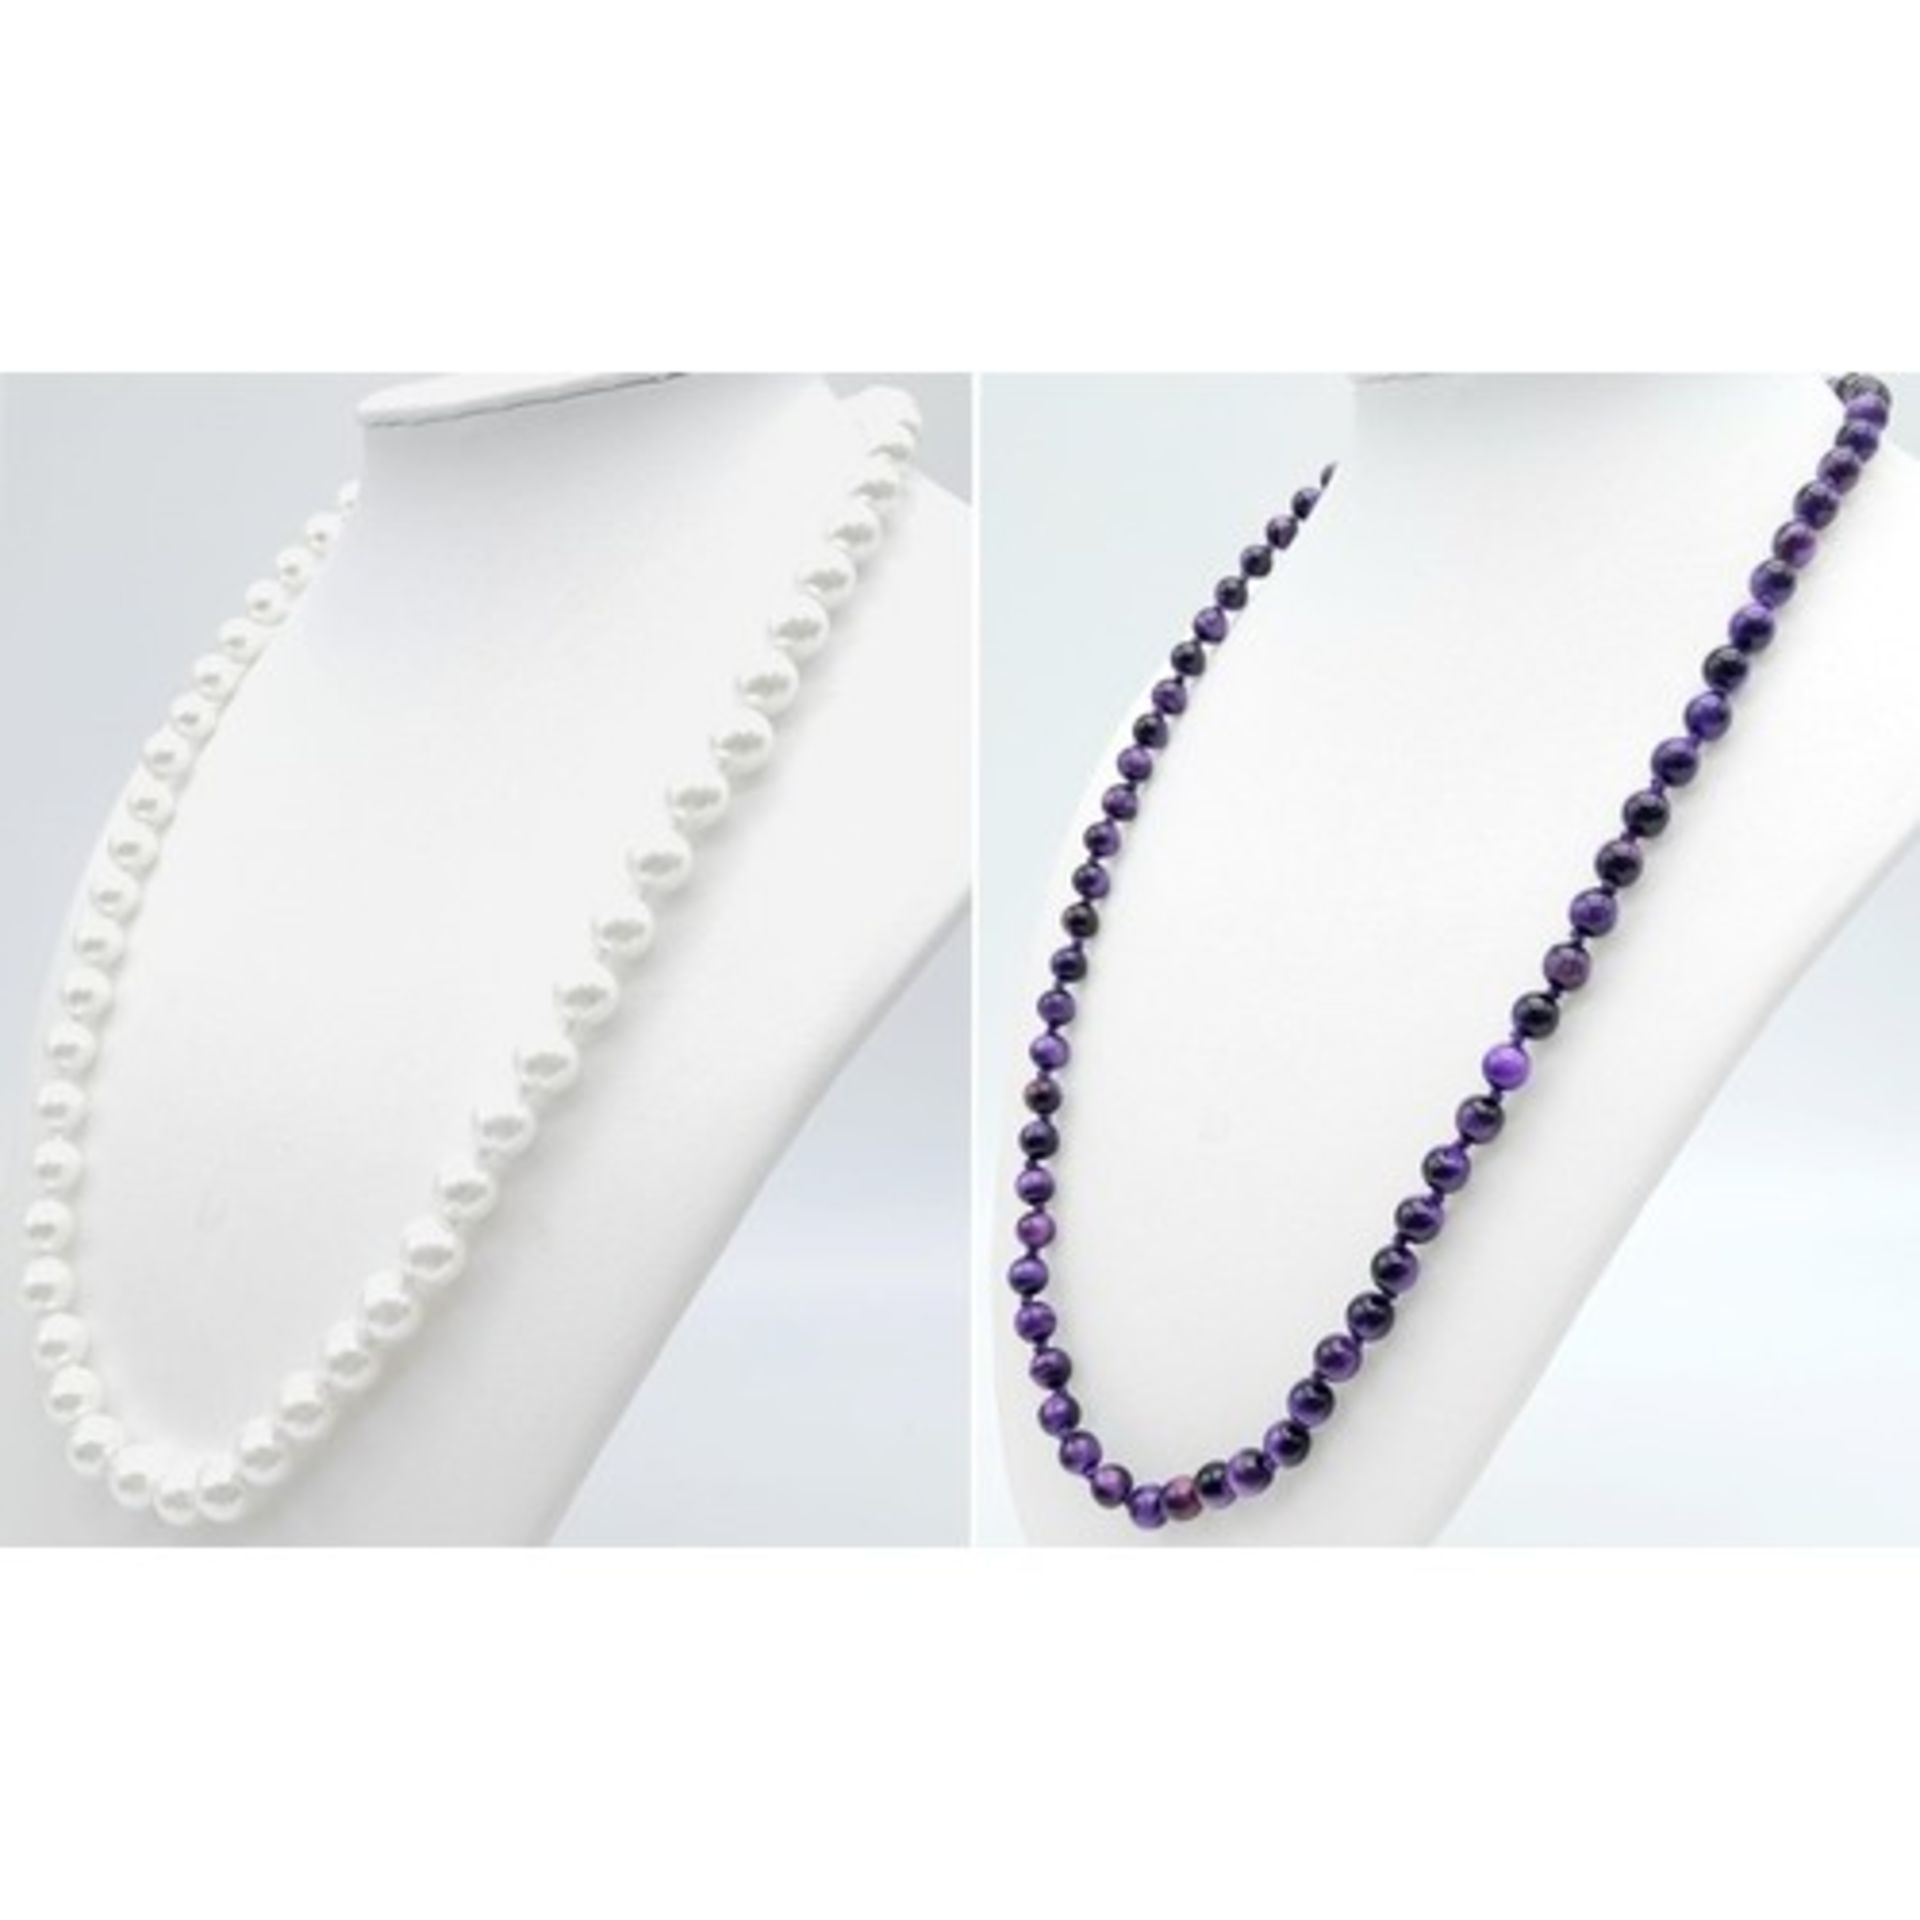 Duo of Beaded Stone Necklaces. One Pearlescent White (48cm) and one Iridescent Black/Purple Stone ( - Bild 2 aus 3